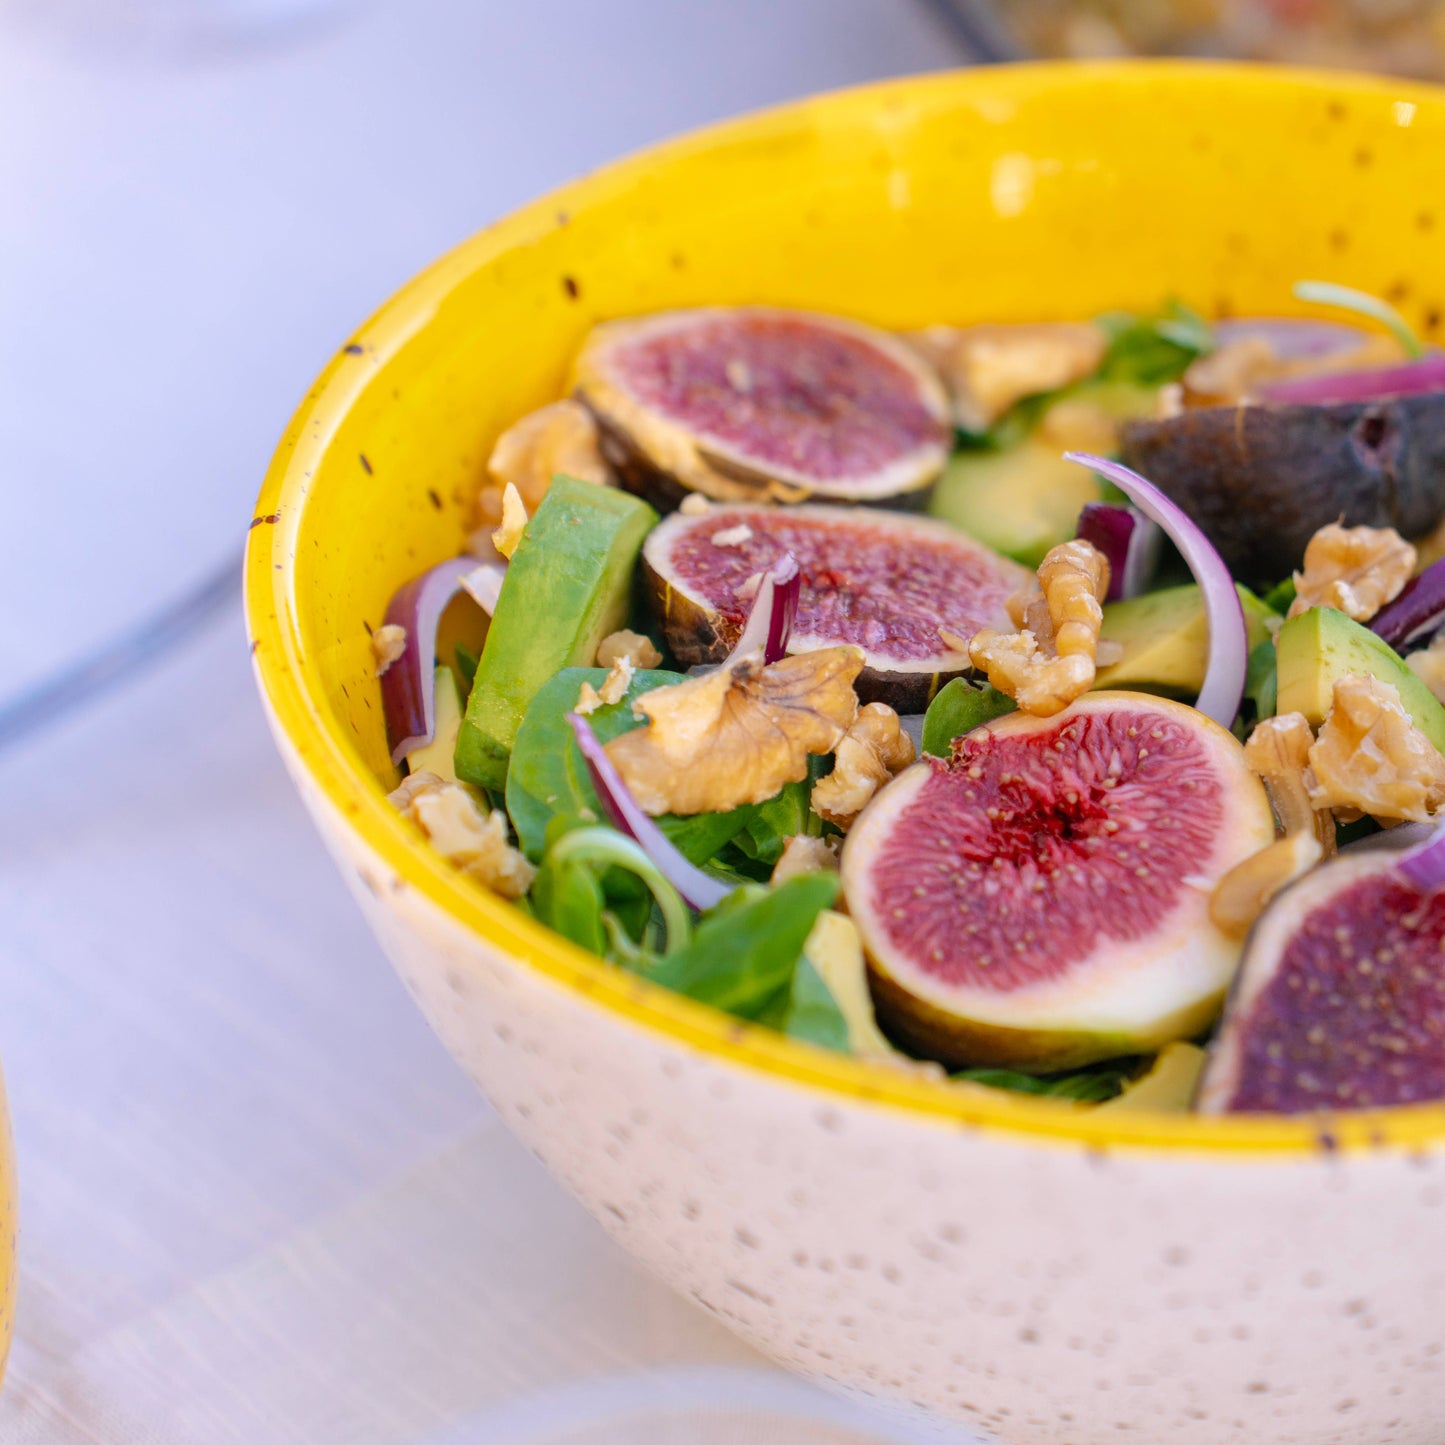 Ceramic Spanish Bowl with yellow interior with Fig and Walnut salad